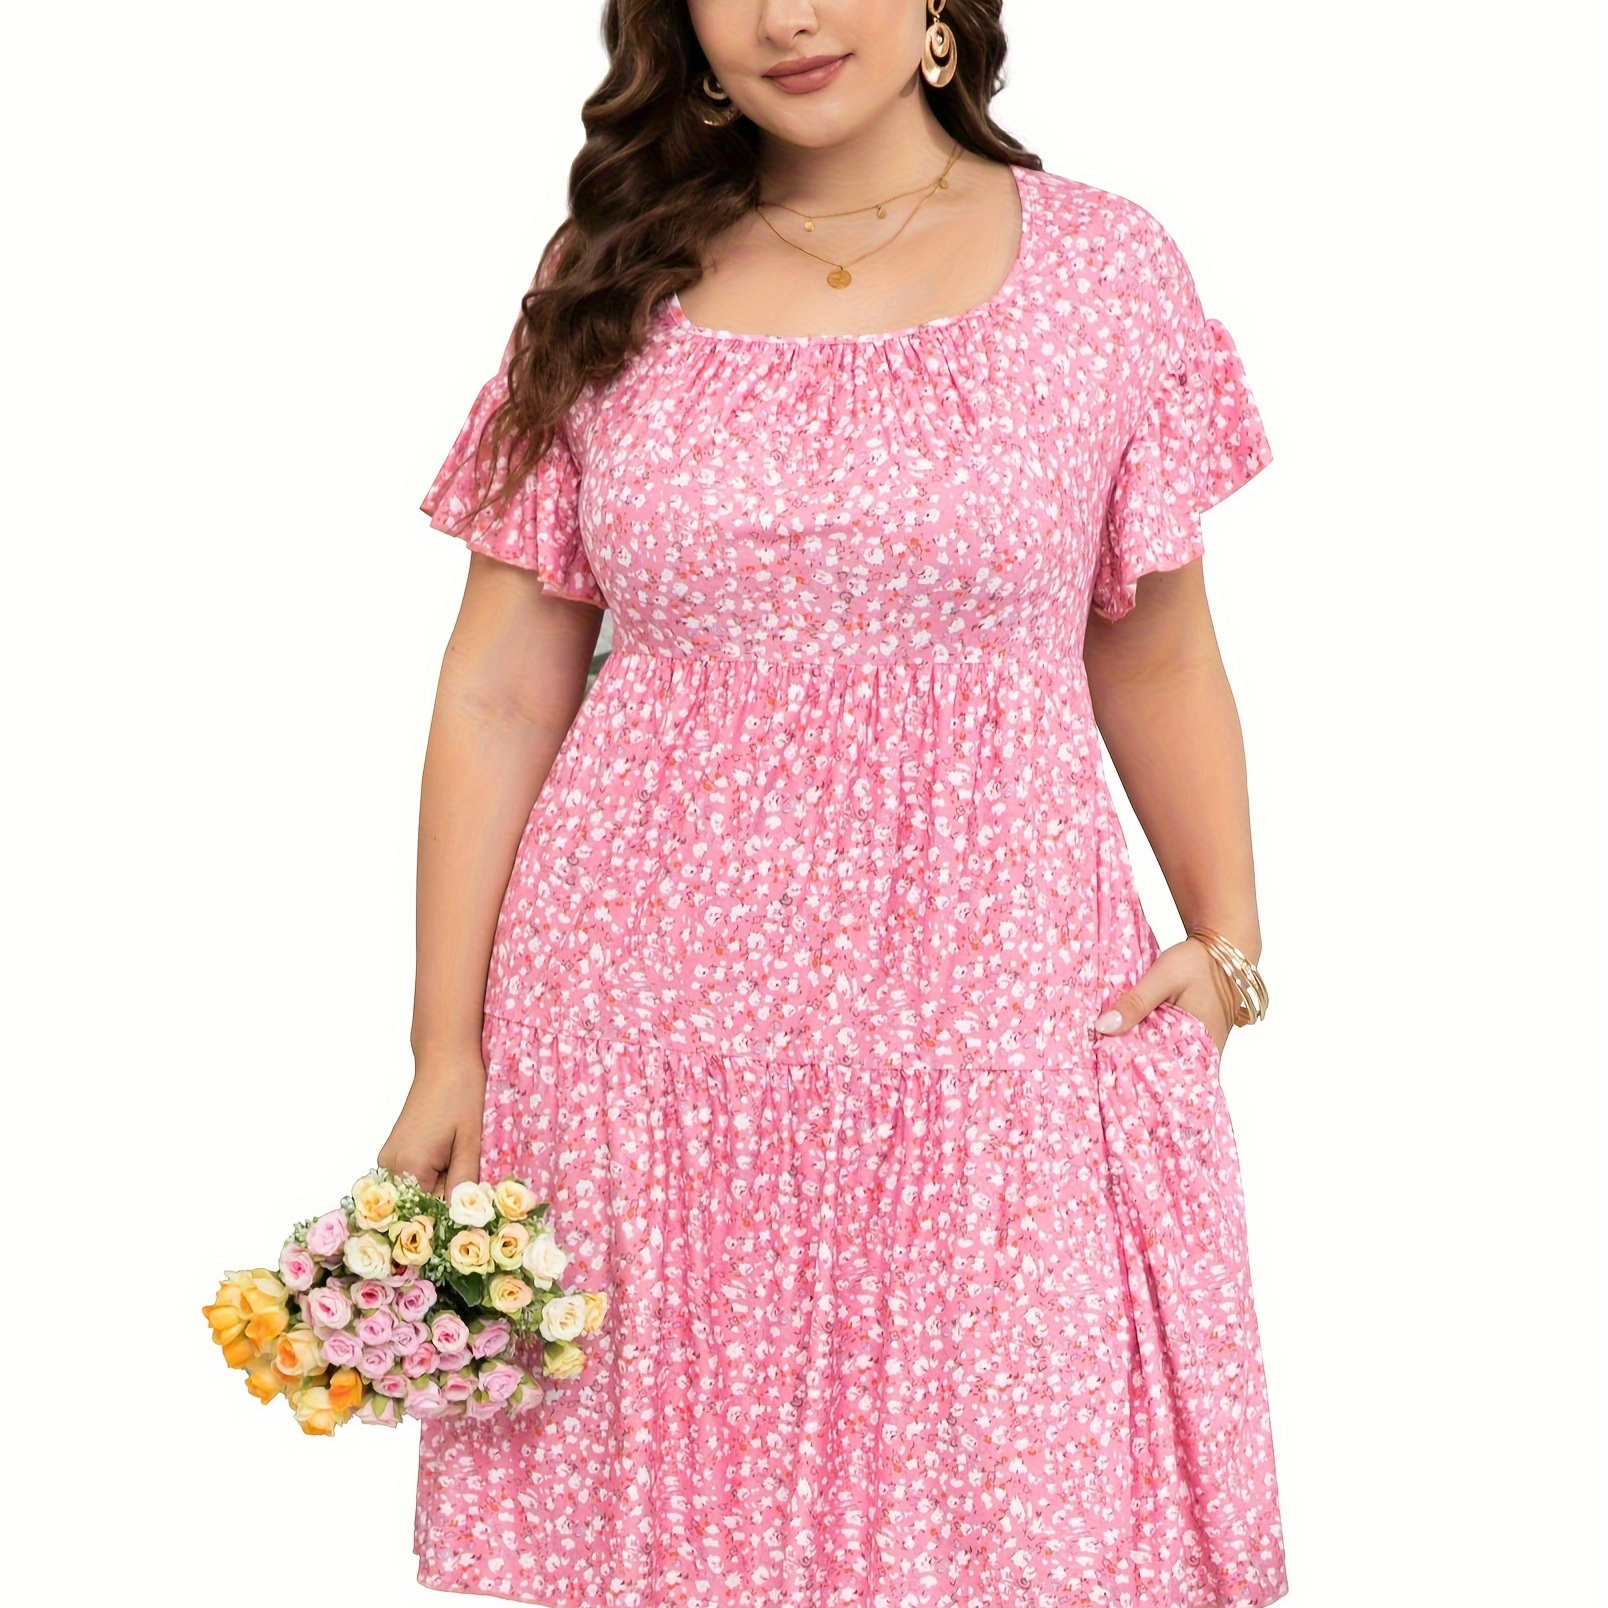 

Plus Size Floral Print Dress, Casual Square Neck Ruffle Trim Short Sleeve With Pockets Dress For Spring & Summer, Women's Plus Size Clothing